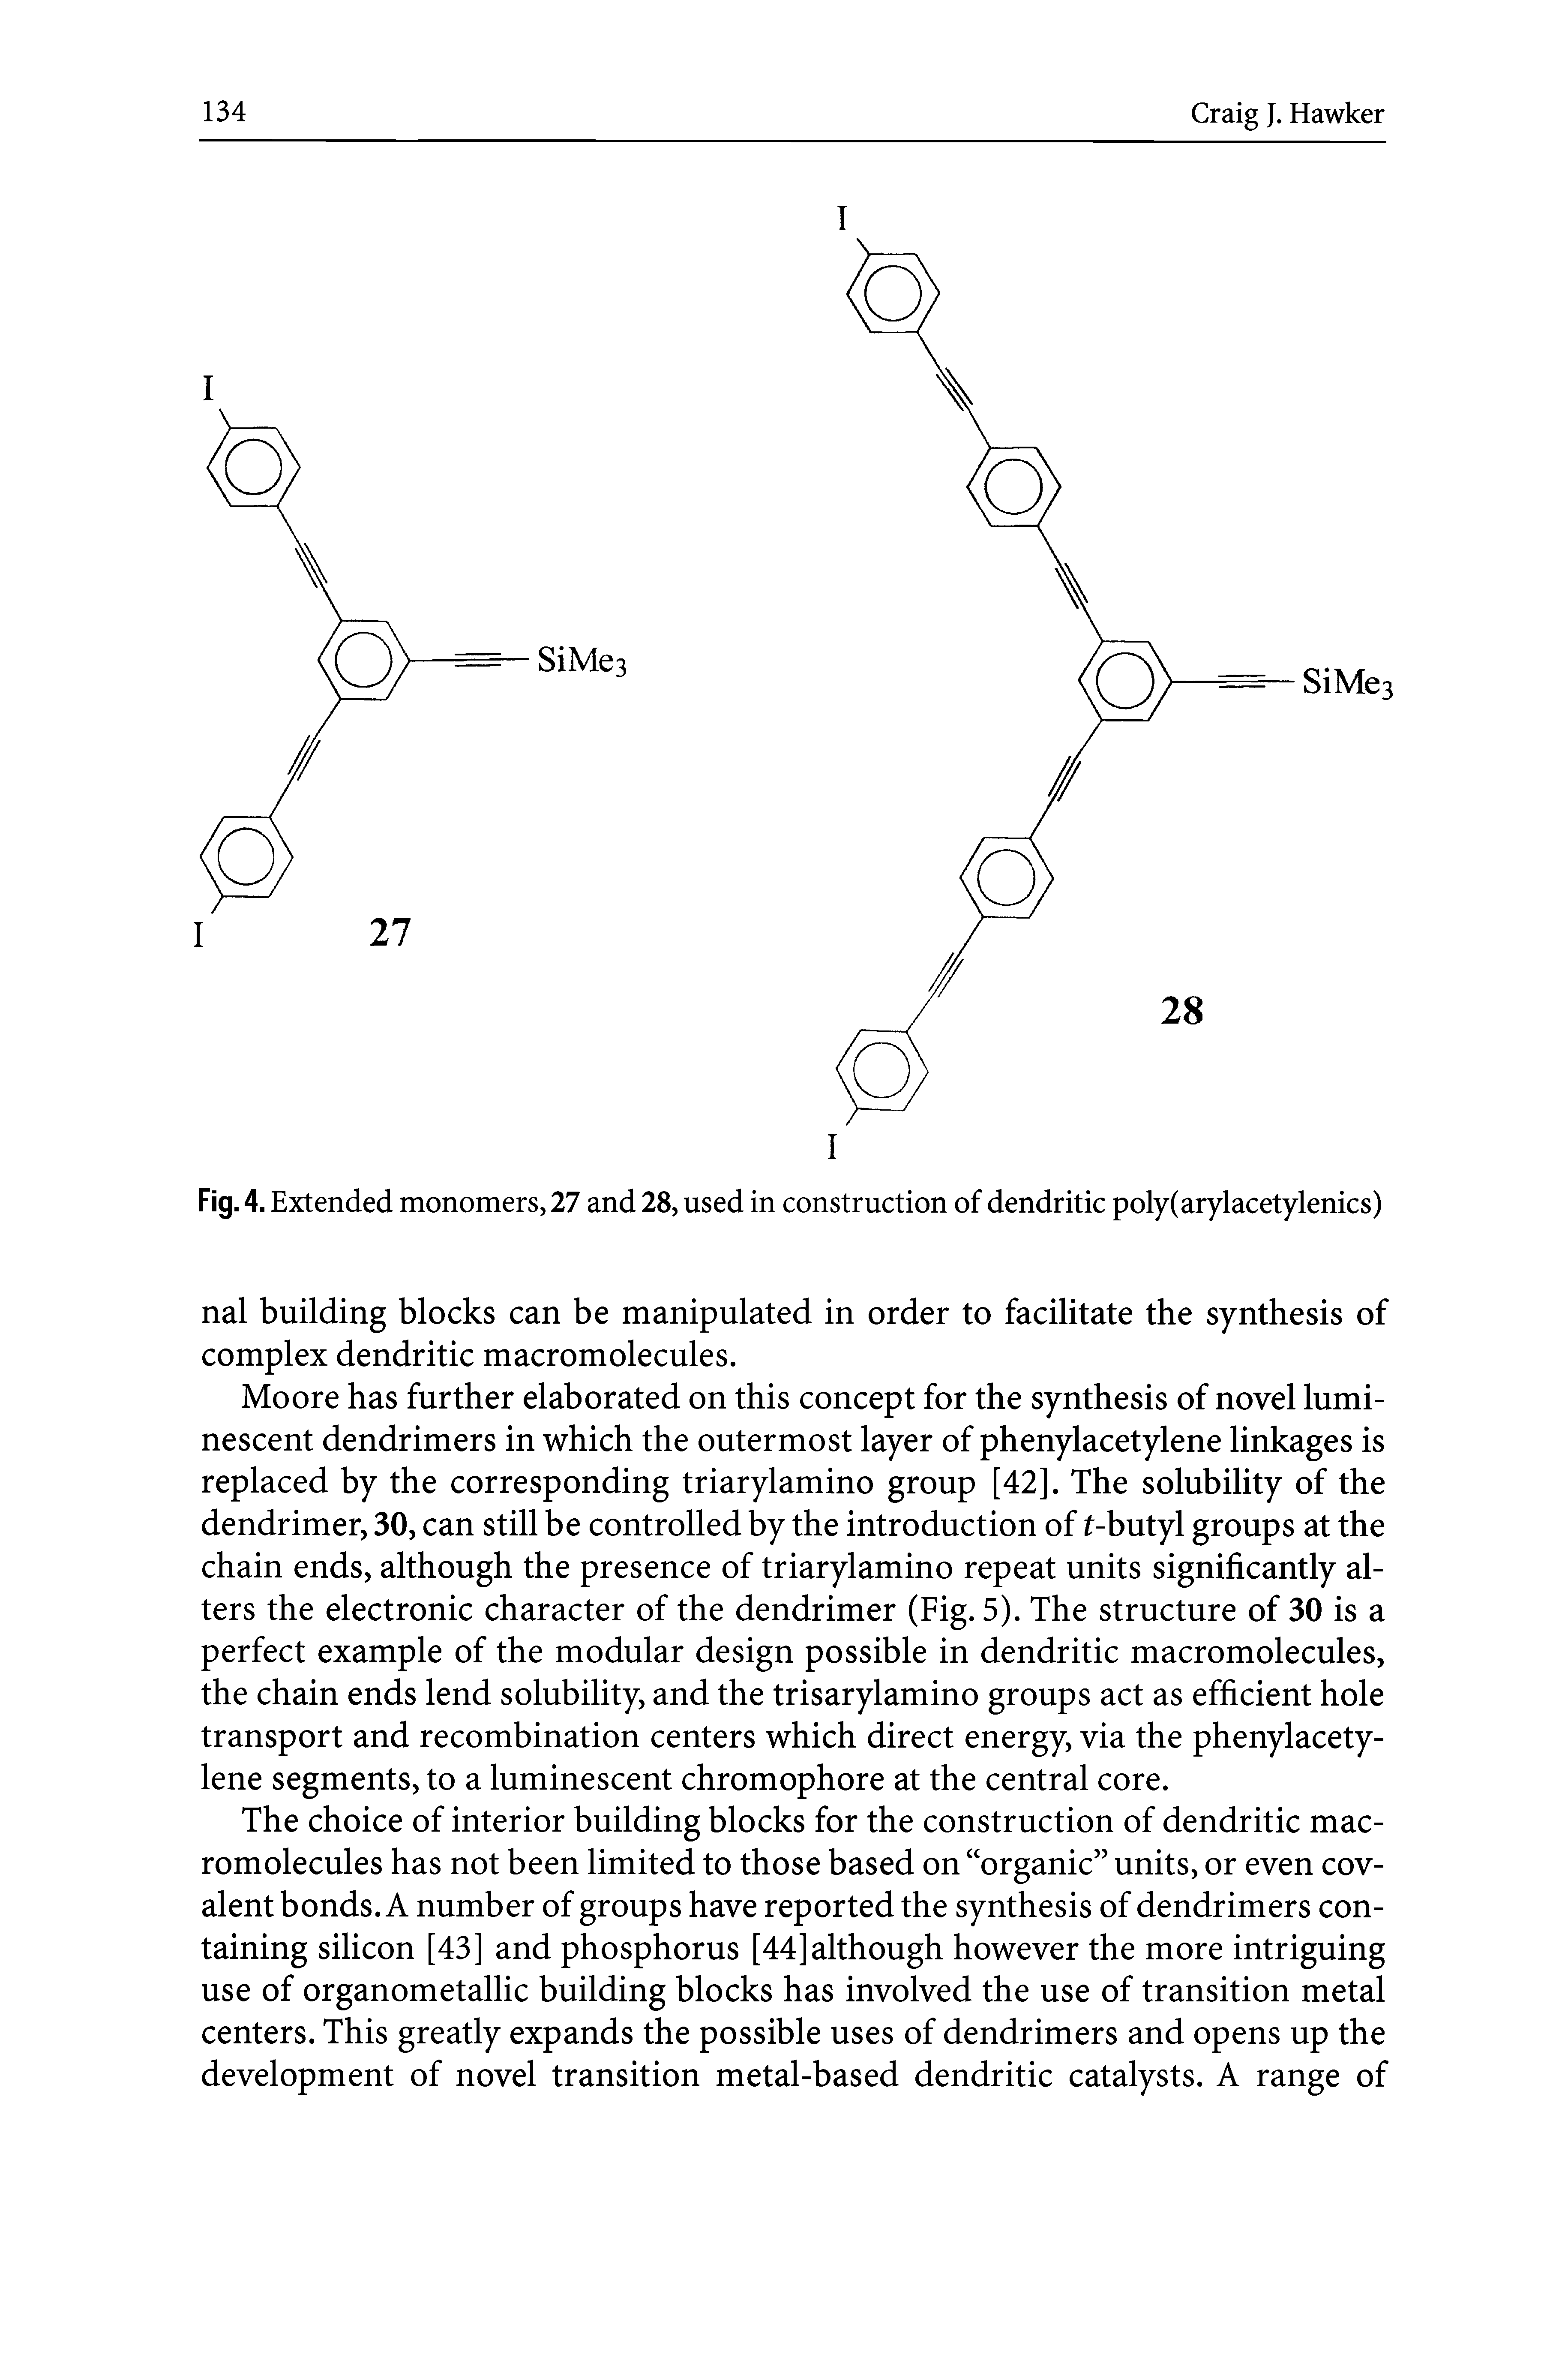 Fig. 4. Extended monomers, 27 and 28, used in construction of dendritic poly(arylacetylenics)...